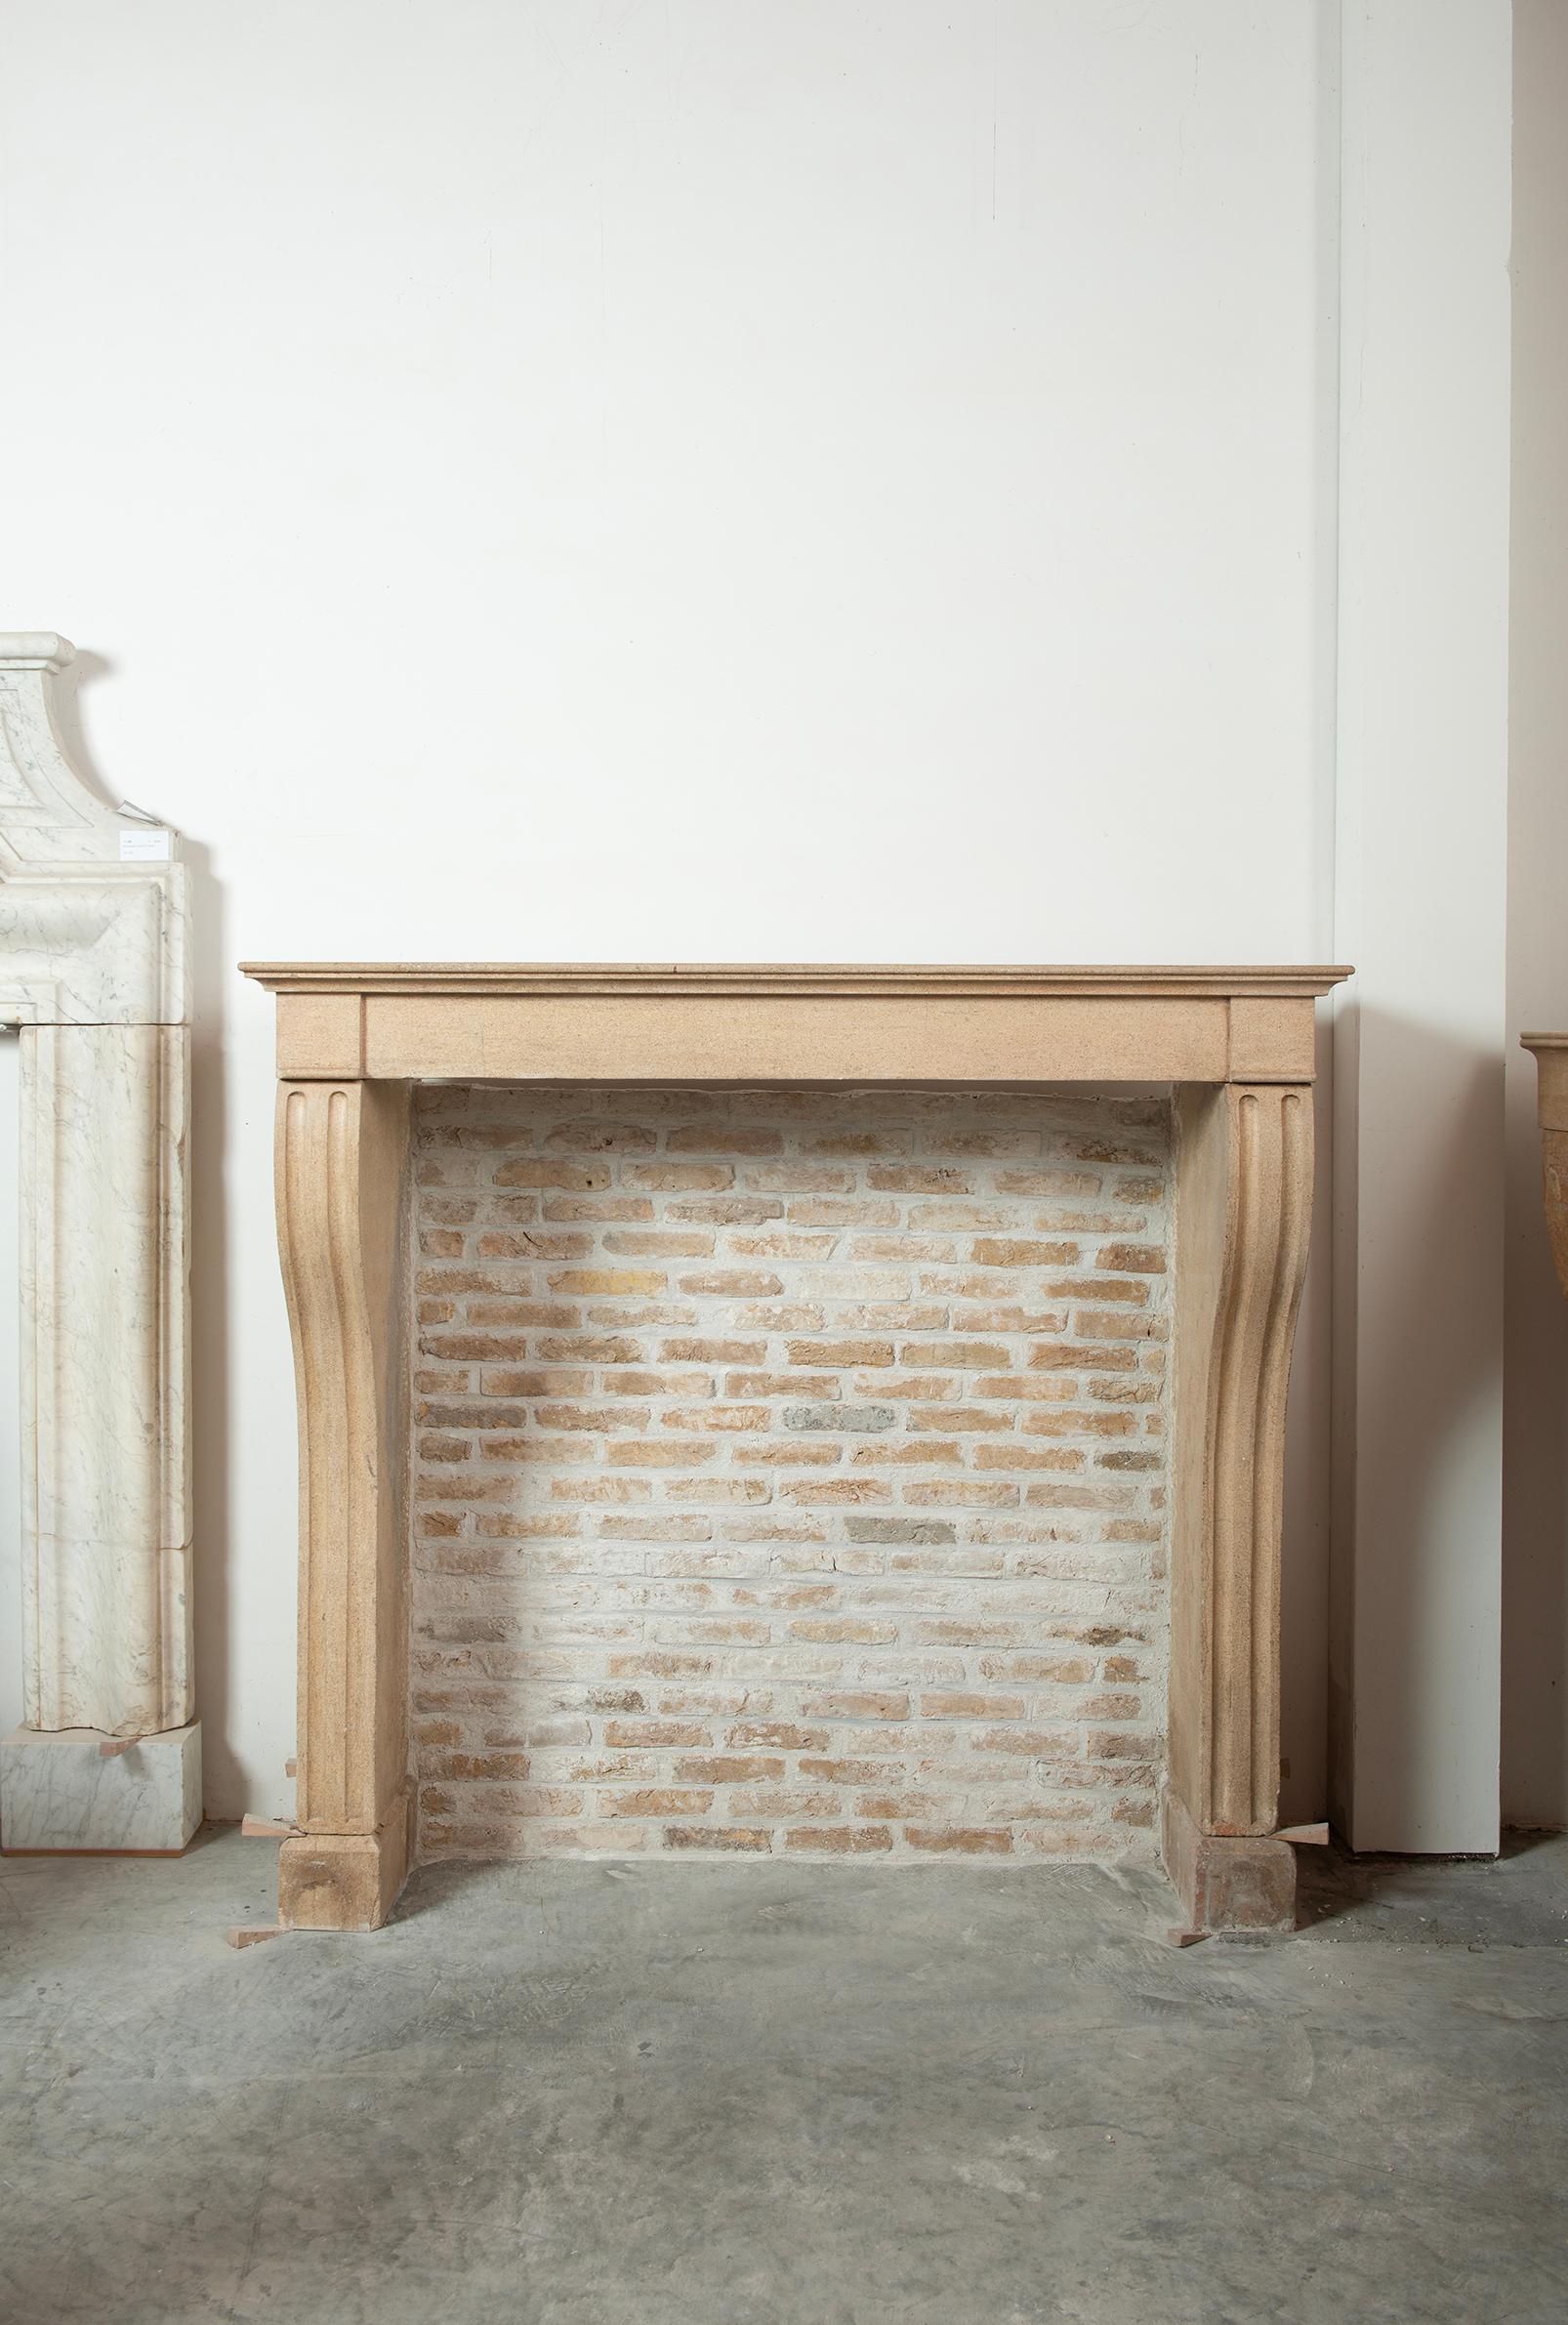 Tall and Elegant Antique Limestone Fireplace mantel.

Nice and tall robust French country fireplace mantel in Burgundy limestone.
It’s nice proportions make is very suitable for an outdoor fireplace or large living areas. It simple lines and style